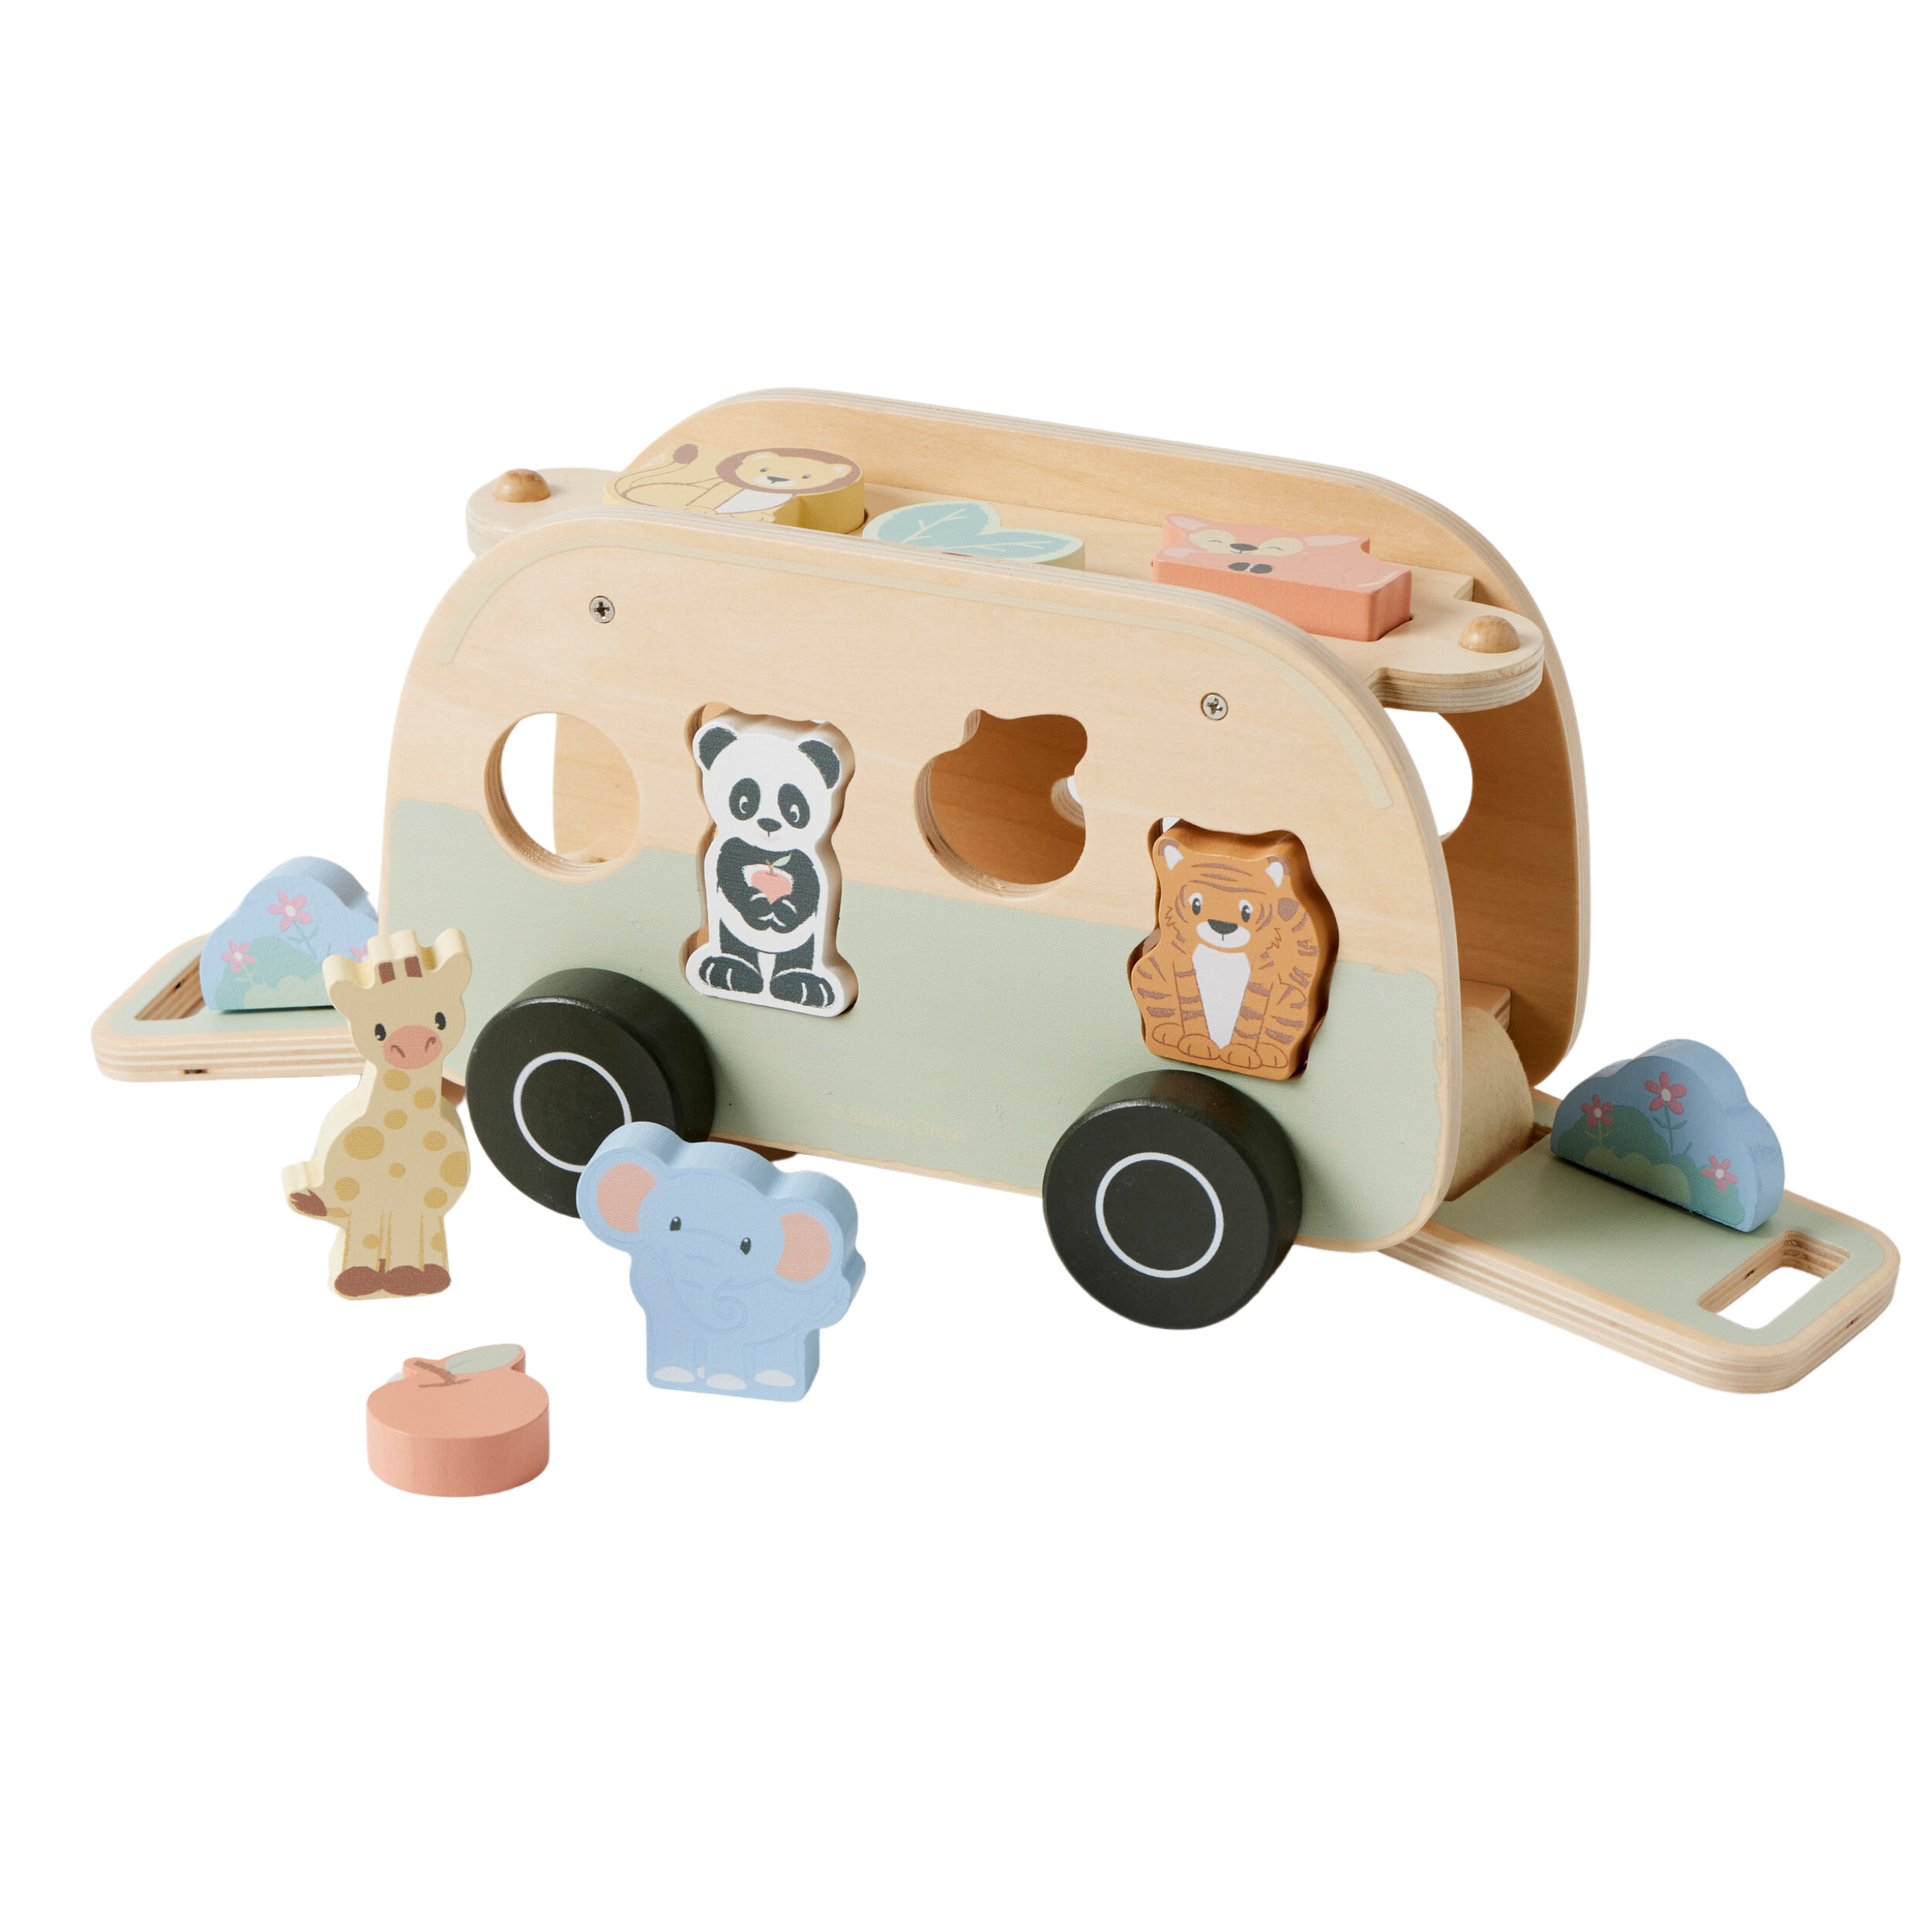 Wood campervan shape sorting toy with pastel painted safari animal shapes